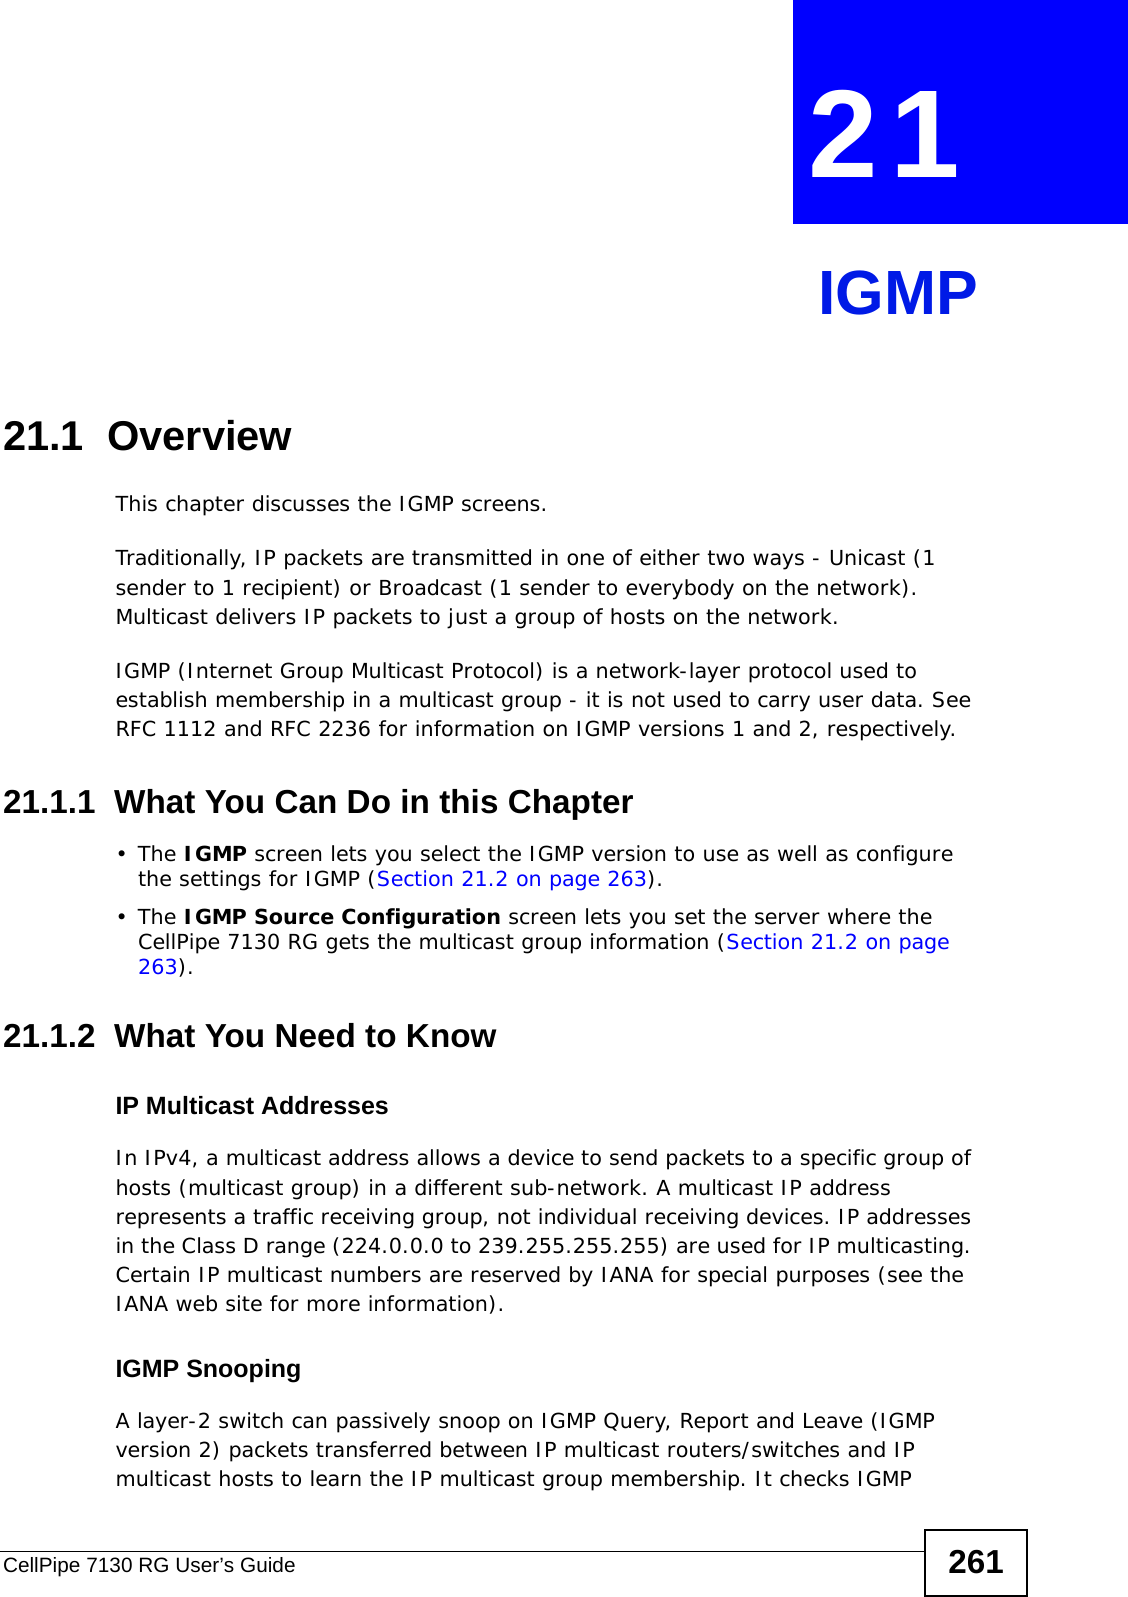 CellPipe 7130 RG User’s Guide 261CHAPTER  21 IGMP21.1  OverviewThis chapter discusses the IGMP screens.Traditionally, IP packets are transmitted in one of either two ways - Unicast (1 sender to 1 recipient) or Broadcast (1 sender to everybody on the network). Multicast delivers IP packets to just a group of hosts on the network.IGMP (Internet Group Multicast Protocol) is a network-layer protocol used to establish membership in a multicast group - it is not used to carry user data. See RFC 1112 and RFC 2236 for information on IGMP versions 1 and 2, respectively.21.1.1  What You Can Do in this Chapter•The IGMP screen lets you select the IGMP version to use as well as configure the settings for IGMP (Section 21.2 on page 263).•The IGMP Source Configuration screen lets you set the server where the CellPipe 7130 RG gets the multicast group information (Section 21.2 on page 263).21.1.2  What You Need to KnowIP Multicast AddressesIn IPv4, a multicast address allows a device to send packets to a specific group of hosts (multicast group) in a different sub-network. A multicast IP address represents a traffic receiving group, not individual receiving devices. IP addresses in the Class D range (224.0.0.0 to 239.255.255.255) are used for IP multicasting. Certain IP multicast numbers are reserved by IANA for special purposes (see the IANA web site for more information).IGMP SnoopingA layer-2 switch can passively snoop on IGMP Query, Report and Leave (IGMP version 2) packets transferred between IP multicast routers/switches and IP multicast hosts to learn the IP multicast group membership. It checks IGMP 